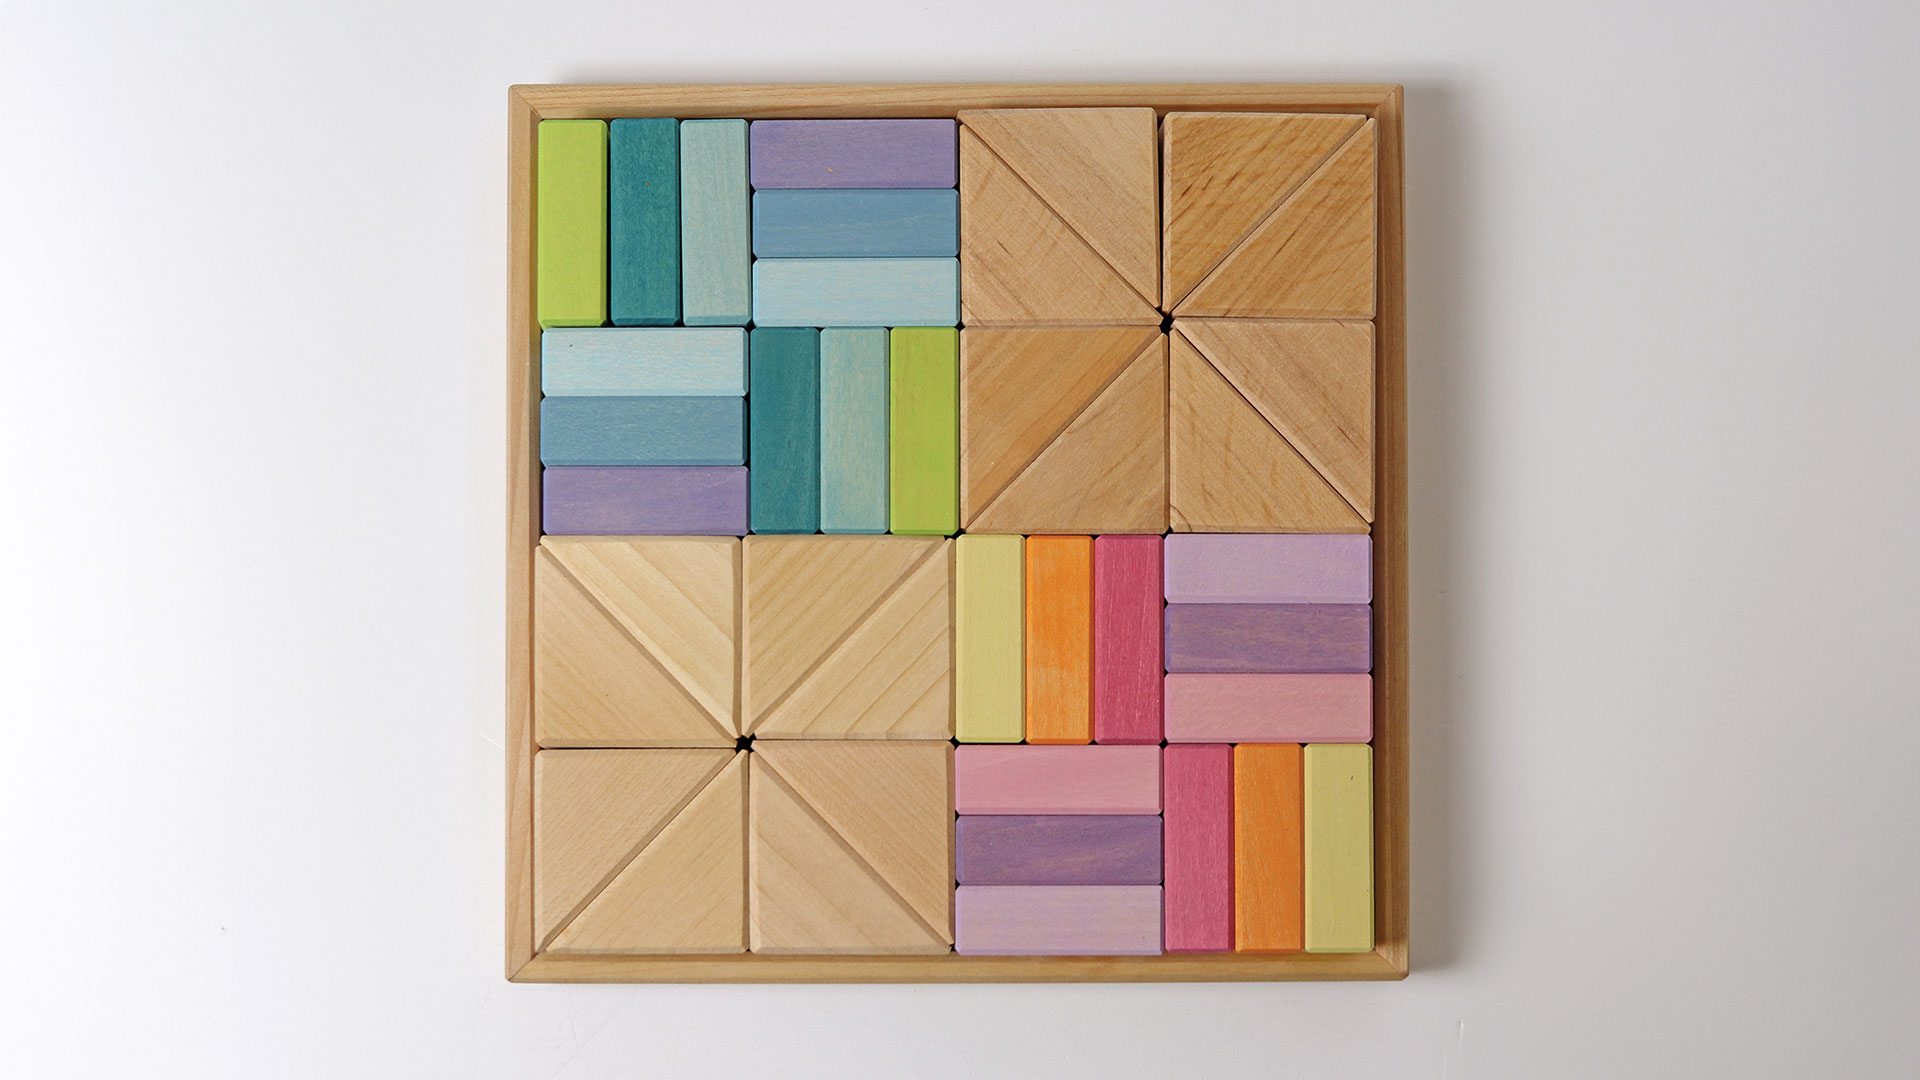 Wooden frame with pastel-coloured and natural-coloured building blocks in triangle and rectangle shapes.